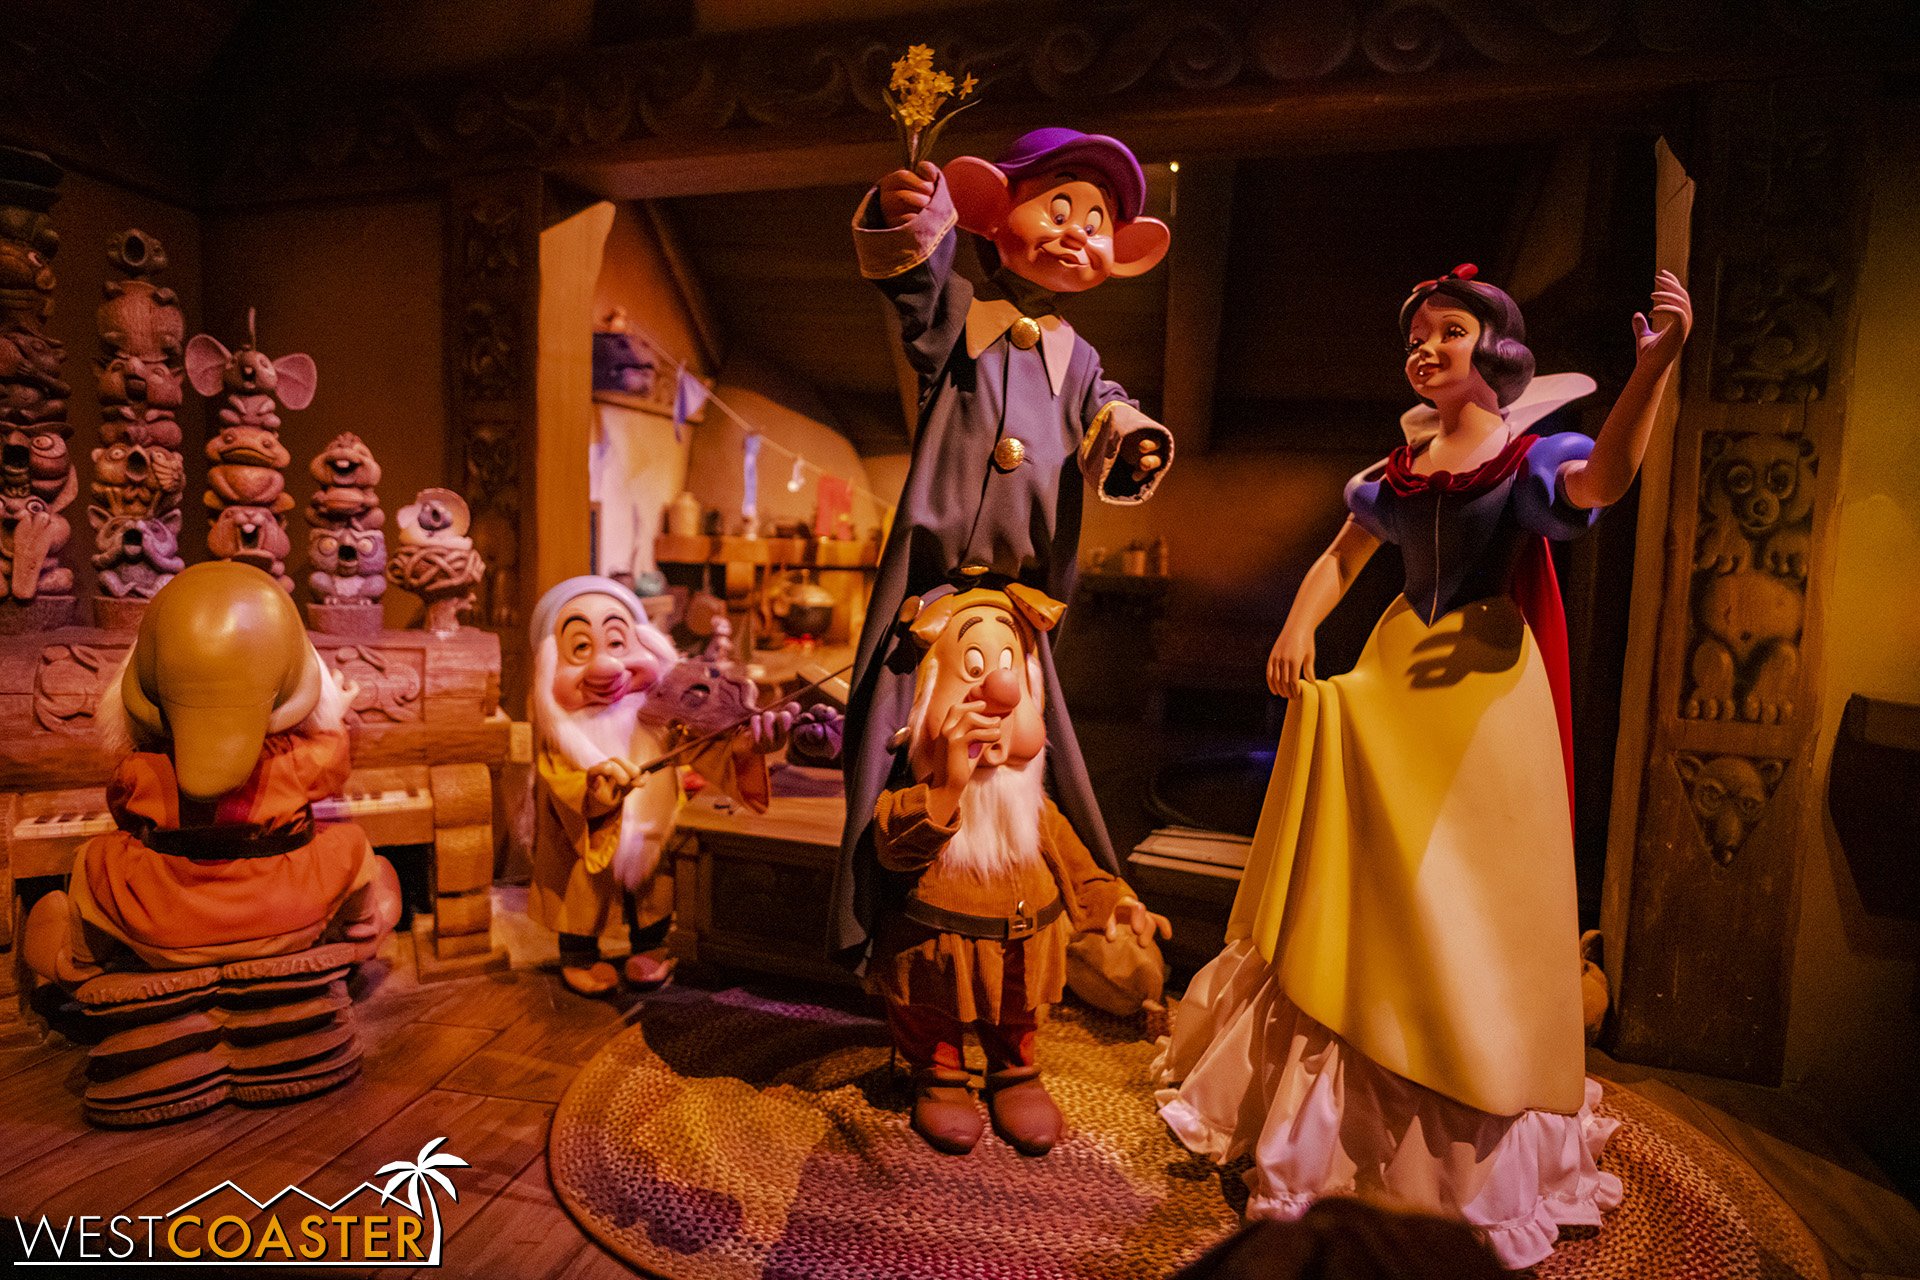  The first scene with Snow White and the Seven Dwarfs has been changed to include Snow White dancing with them rather than just coming down the stairs. 